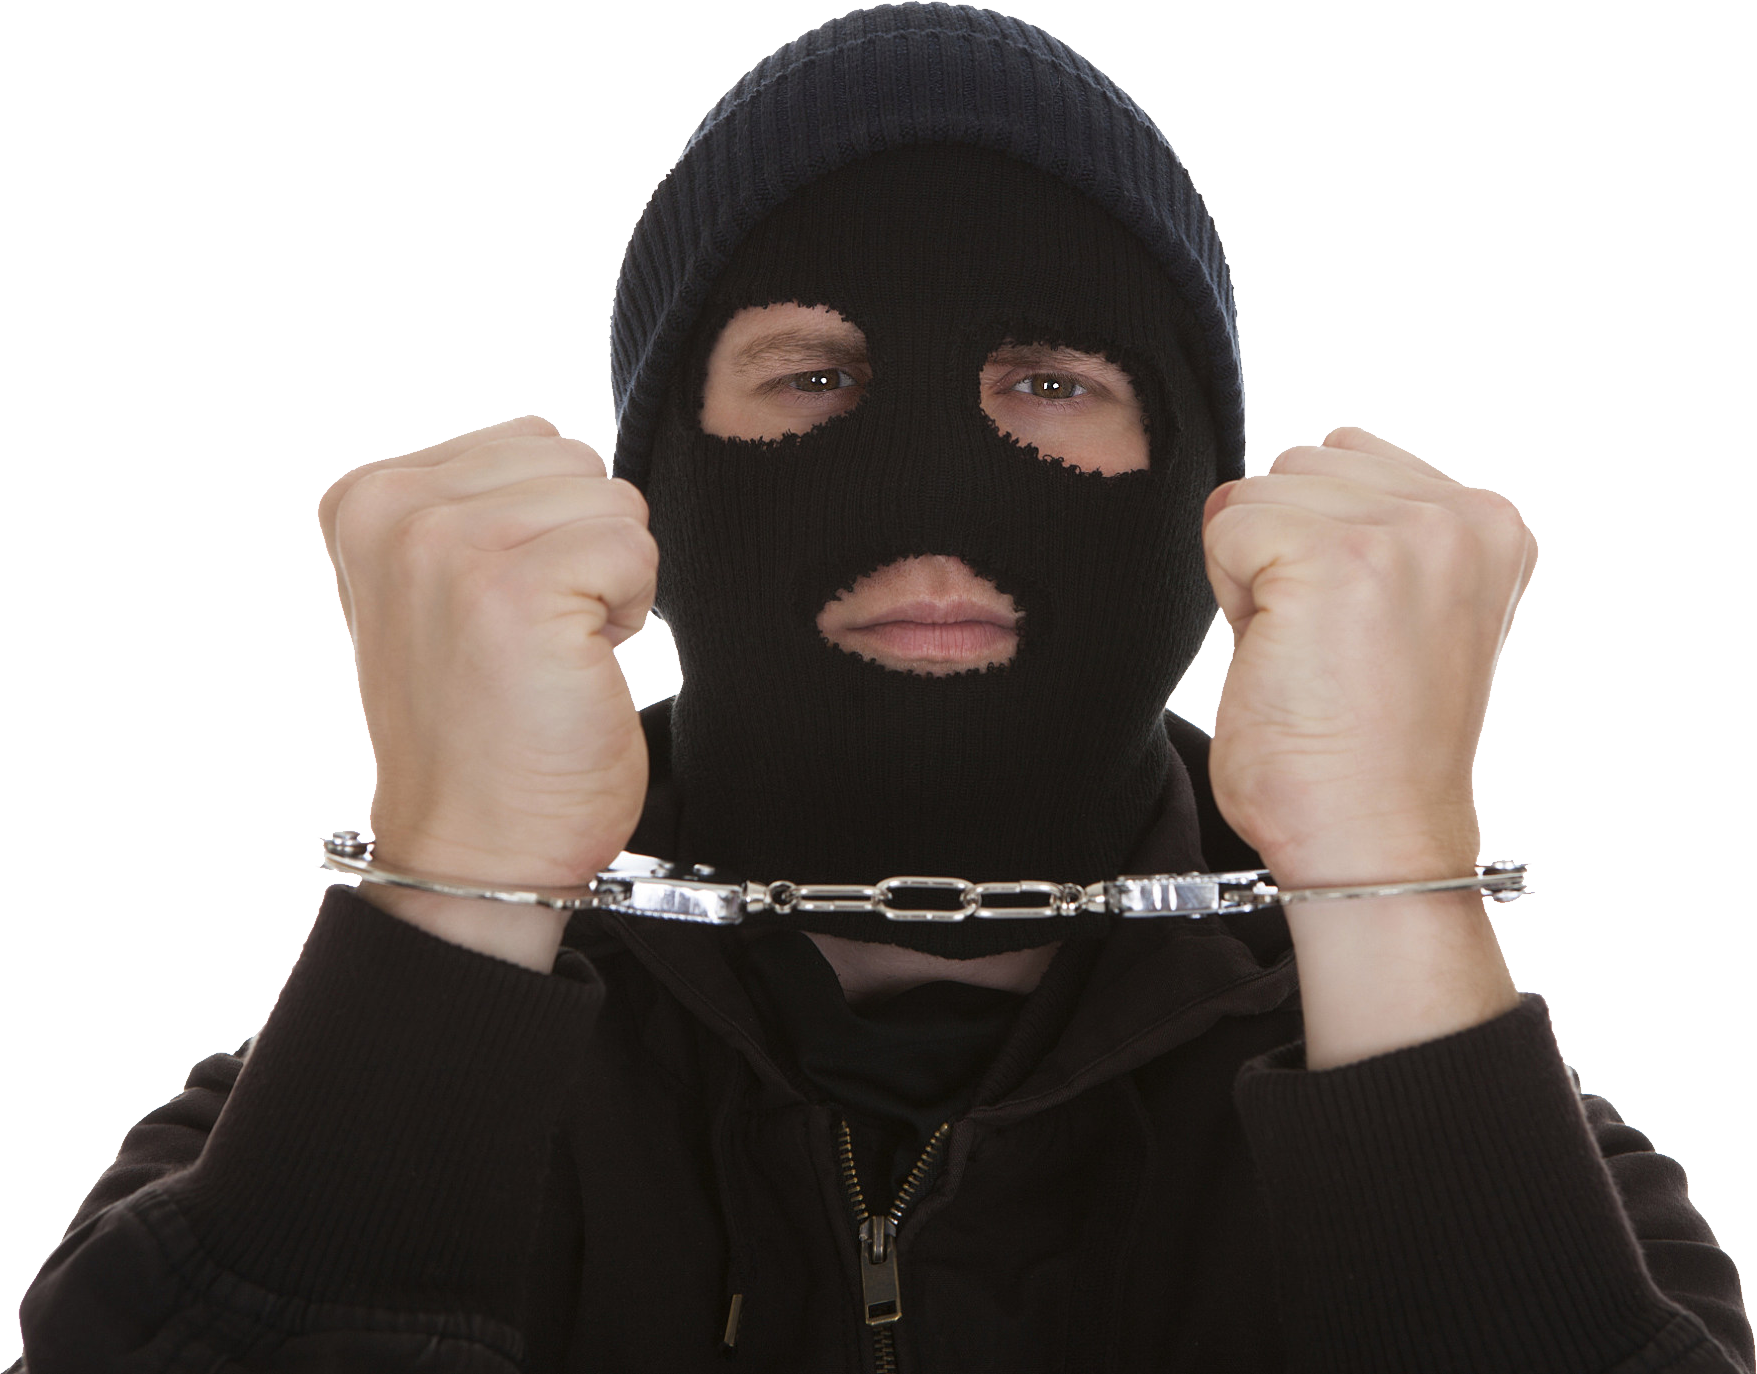 Balaclava PNG images Download 